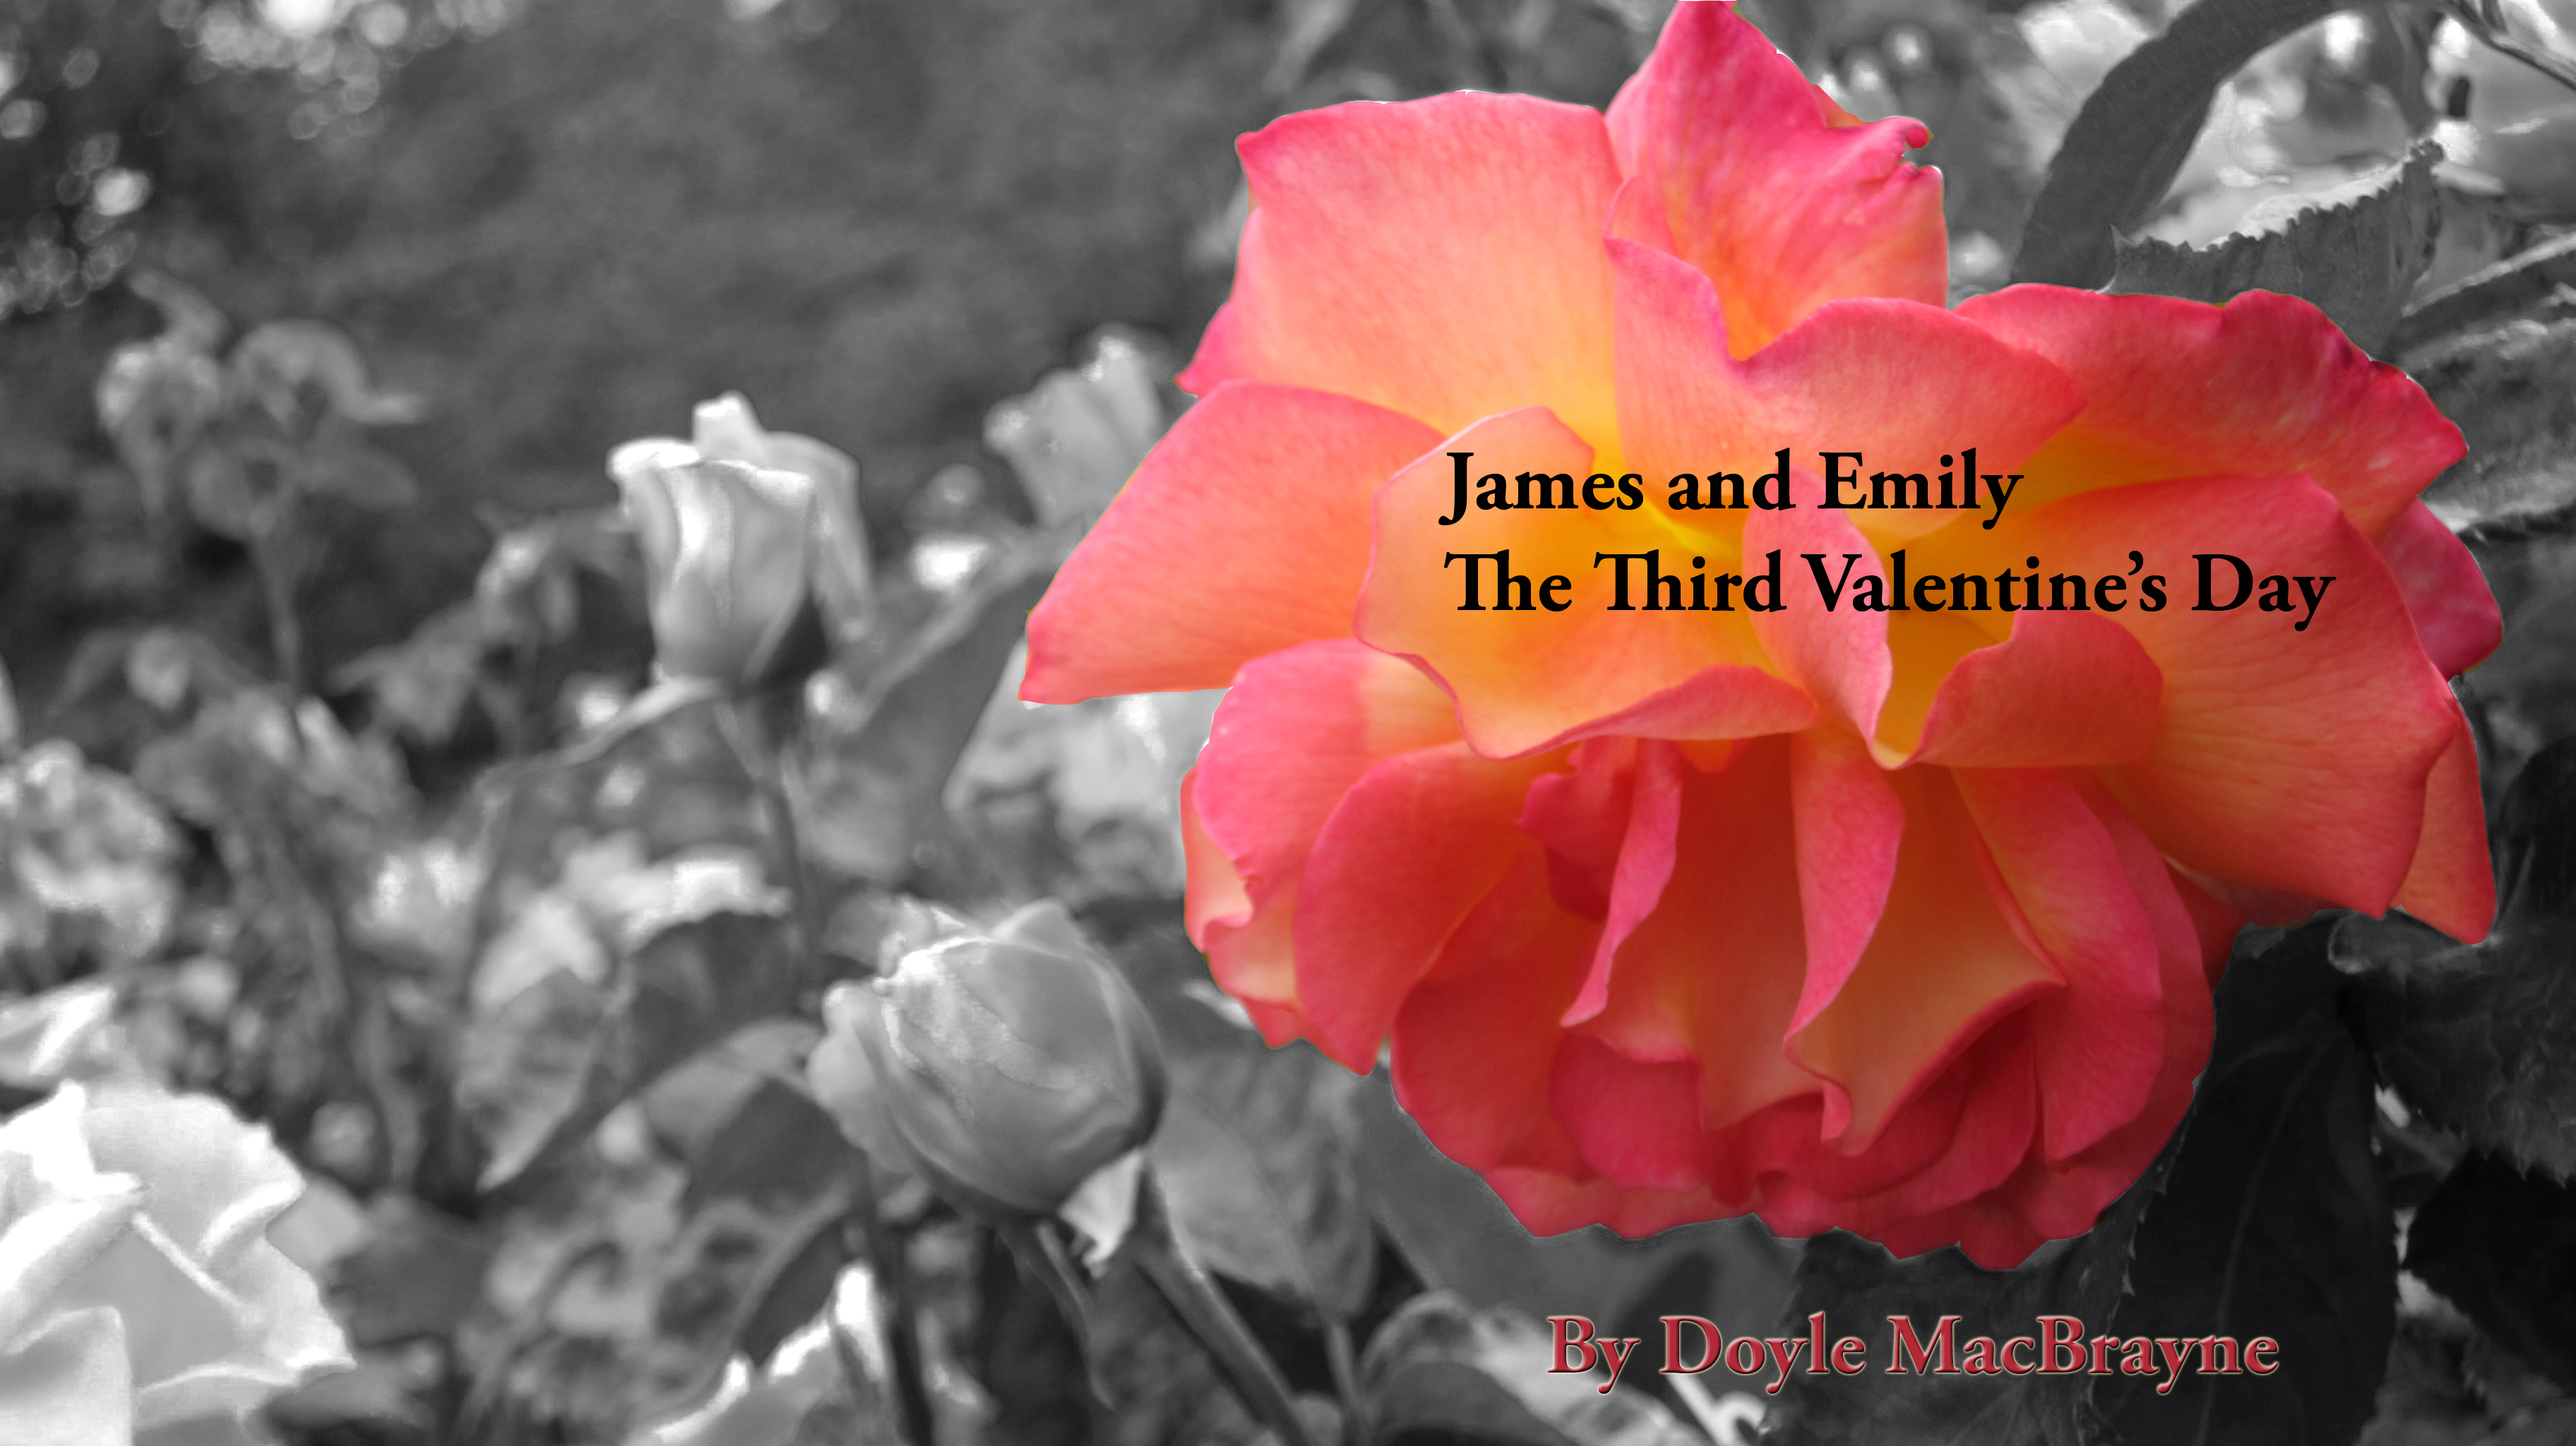 New Cover - New Book  The Third Valentine's Day  - James and Emily's Story